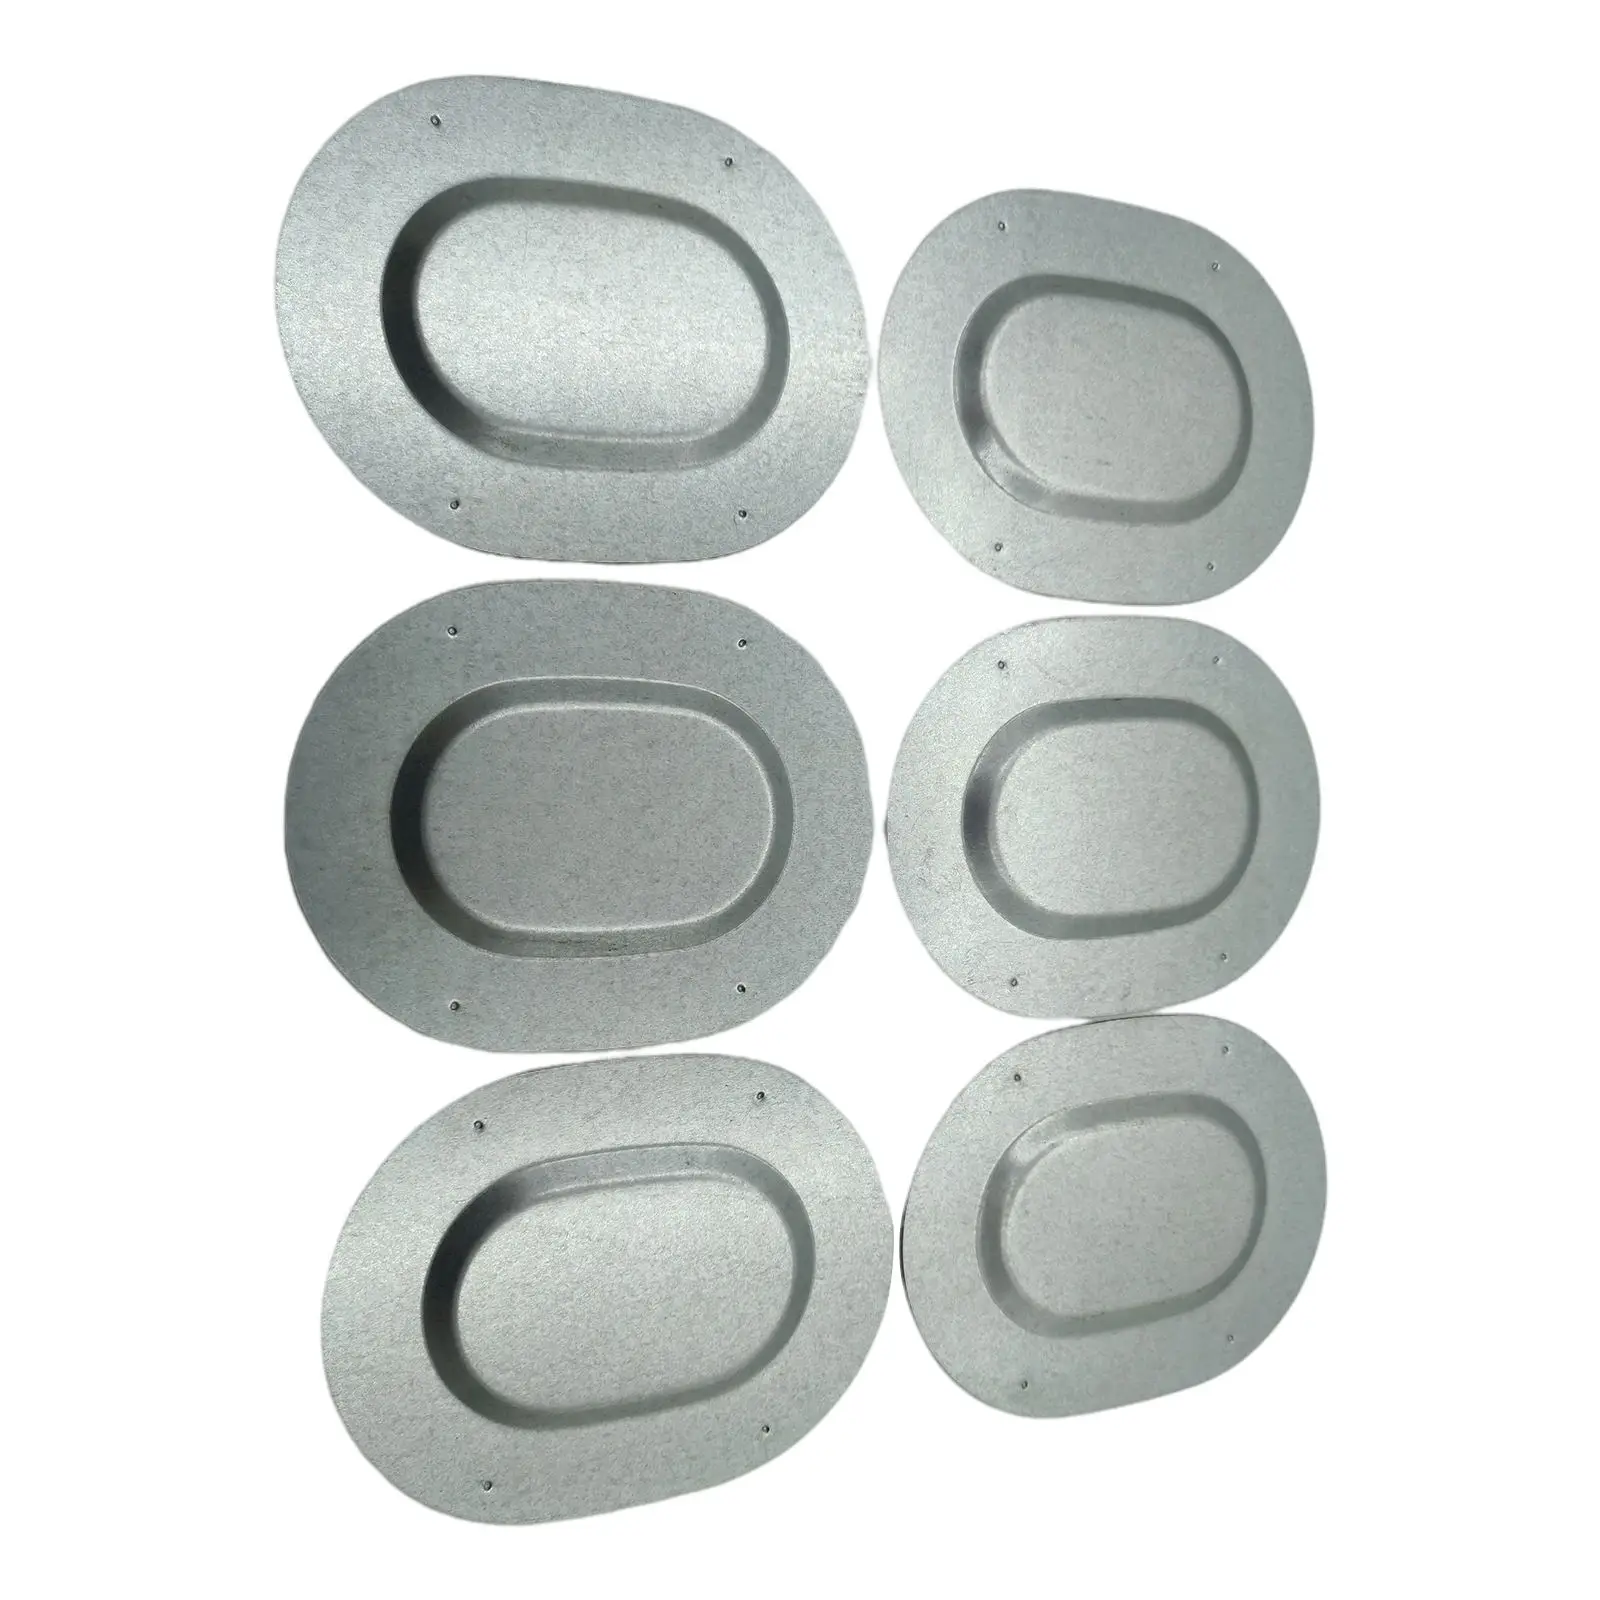 6Pcs Trunk Floor Pan Drain Plugs Set Floor and Trunk Pan Body Metal Automotive Replacement Parts Fit for Chevelle A-Body